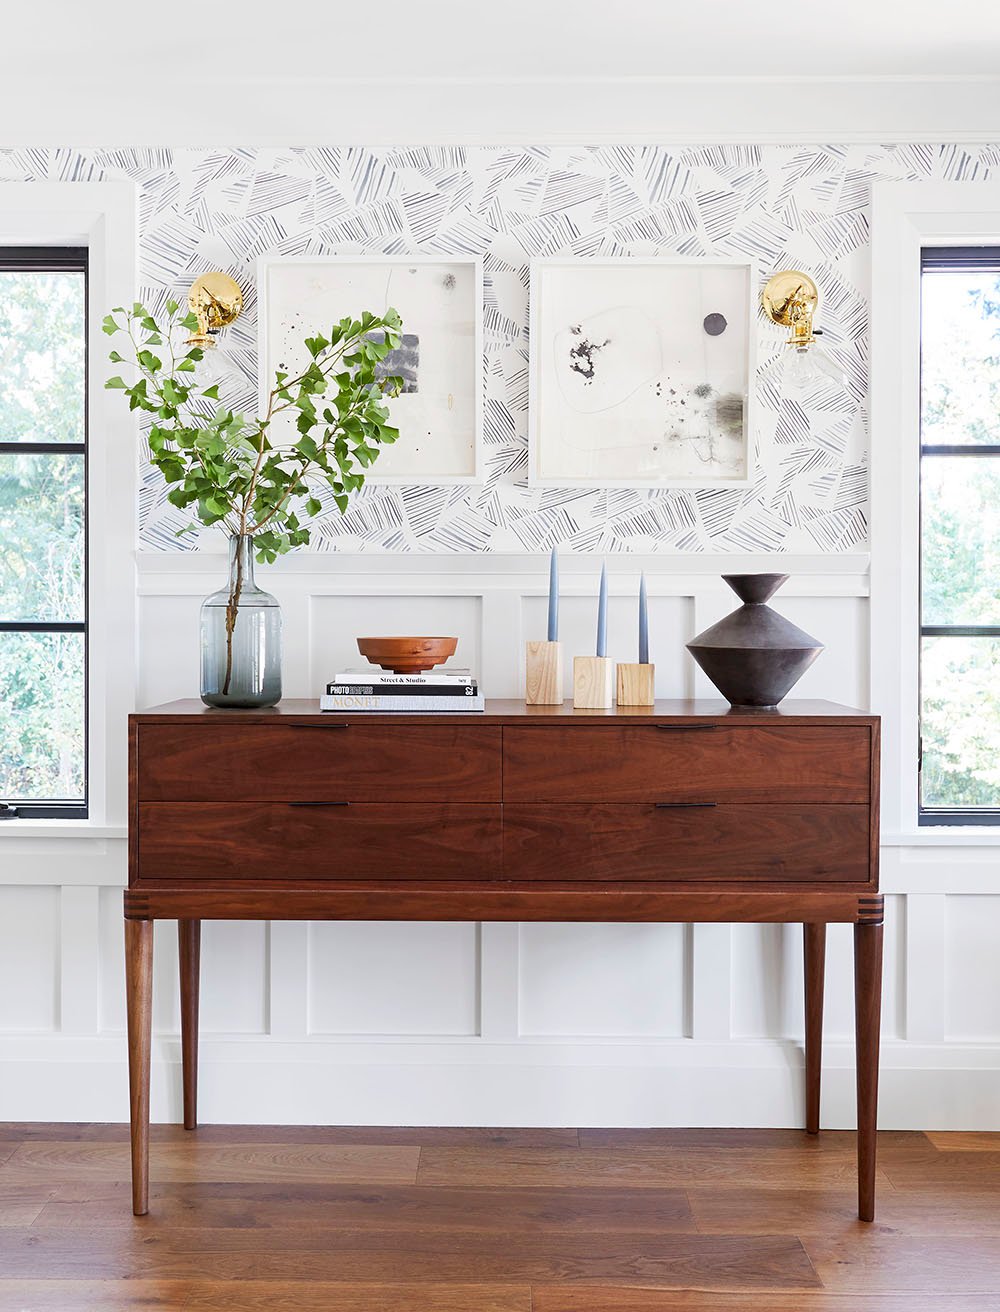 6 Ways to Style a Dining Room Sideboard - roomfortuesday.com